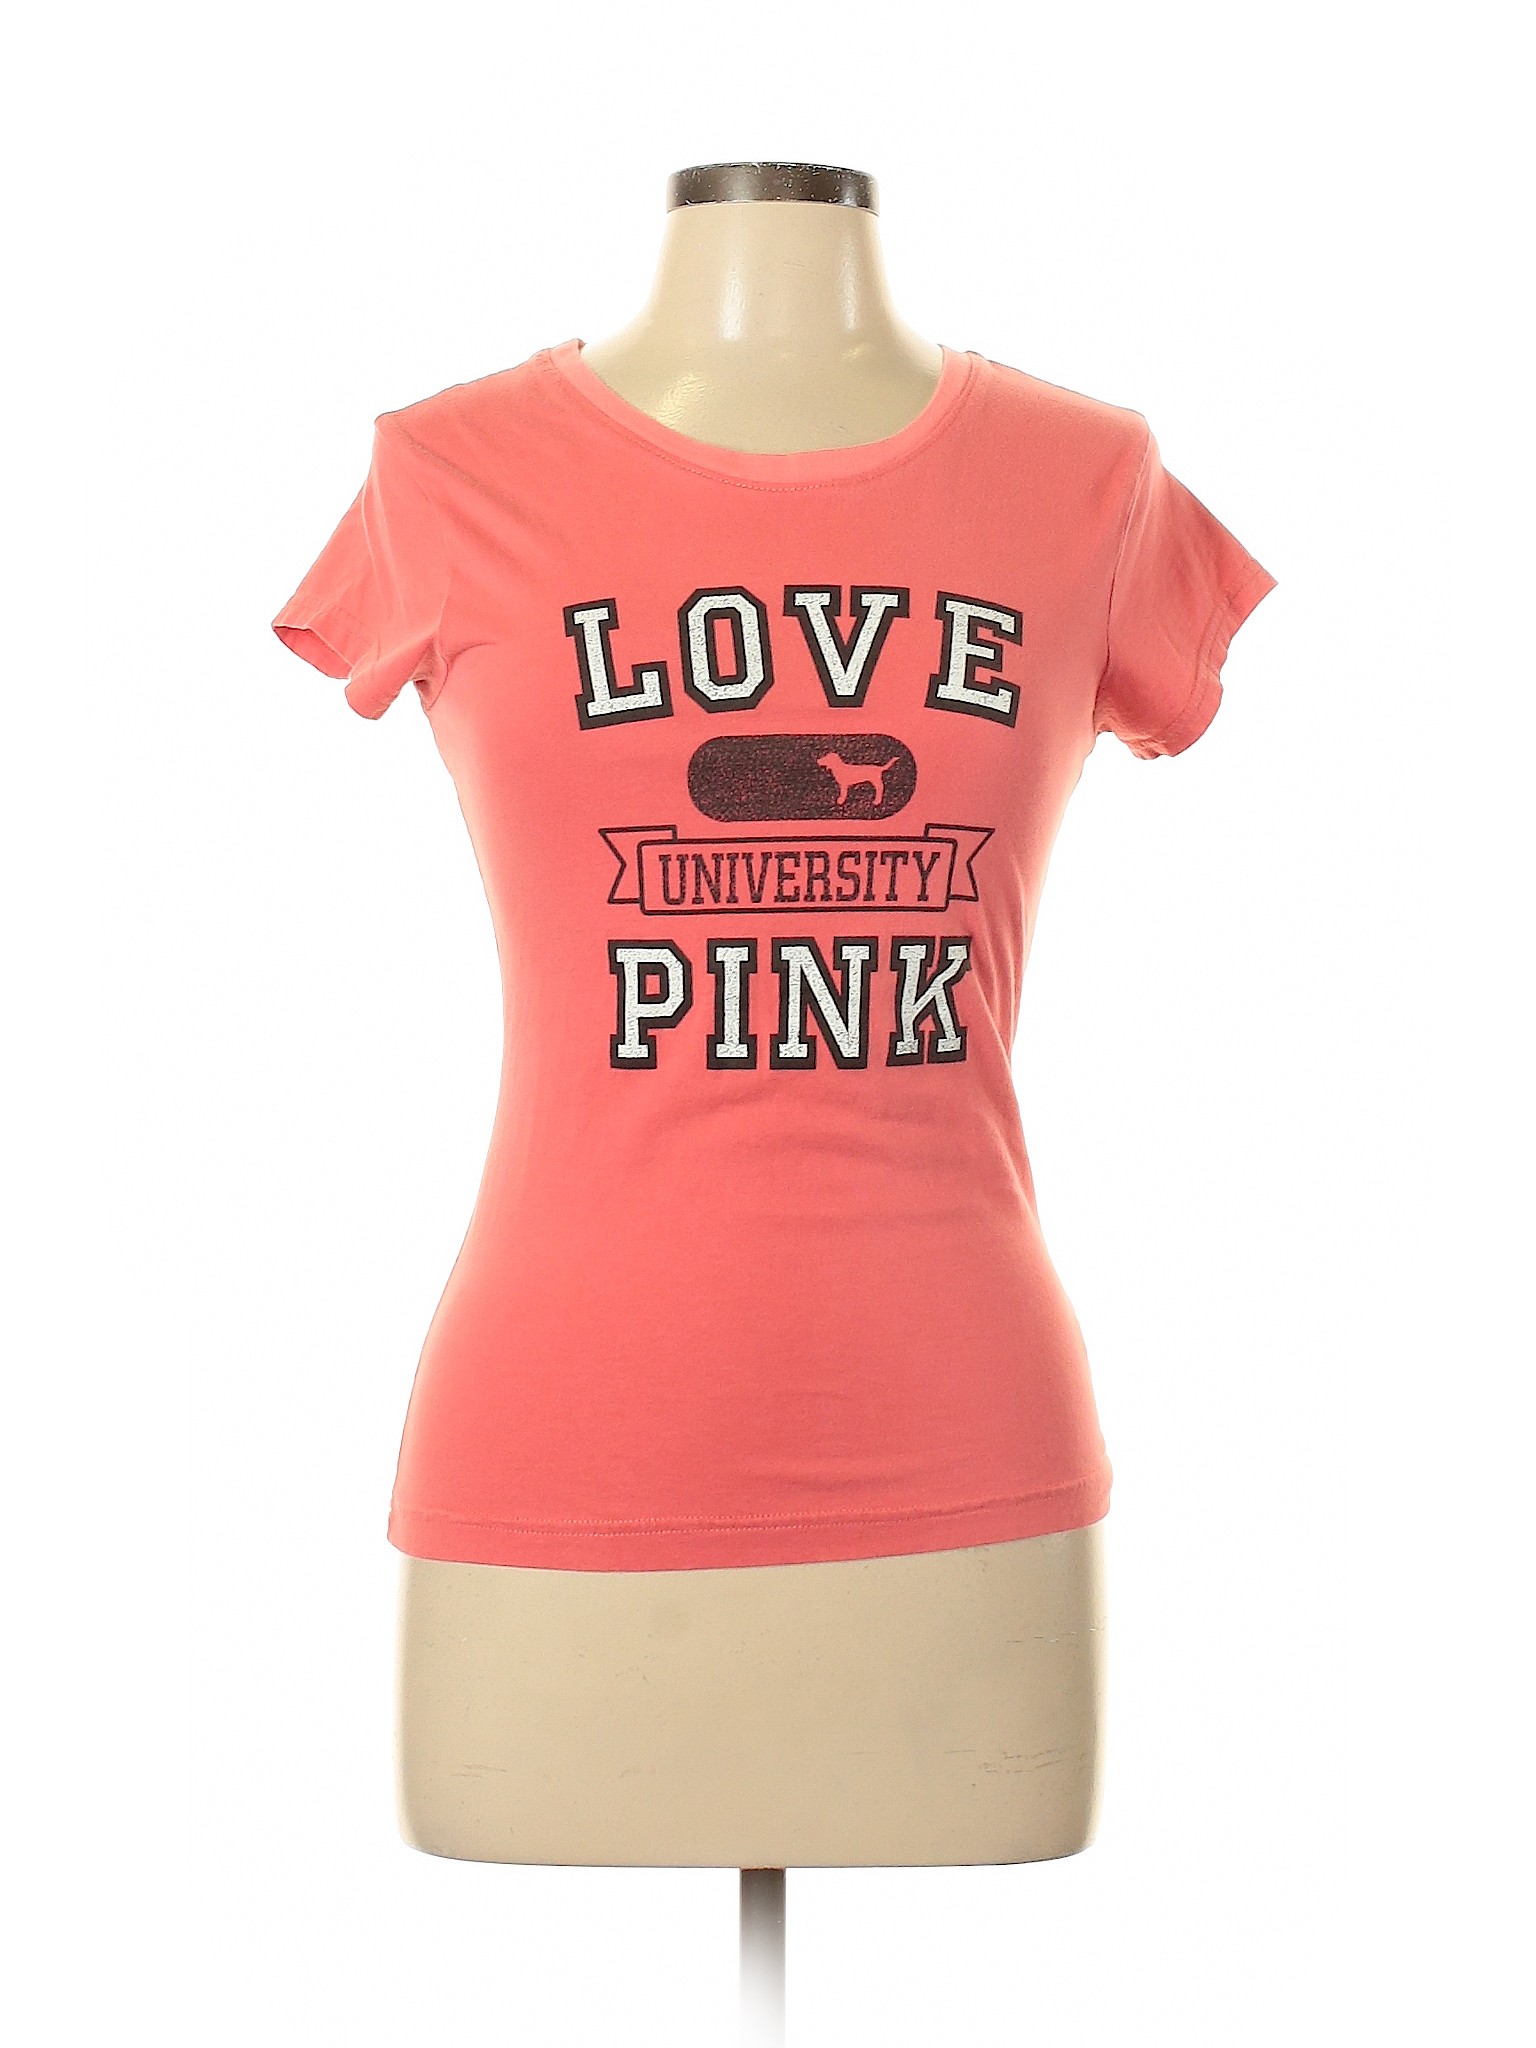 Details about   VICTORIAS SECRET PINK BLING "LOVE PINK" LACE UP SCOOPNECK DOG TEESHIRT NWT